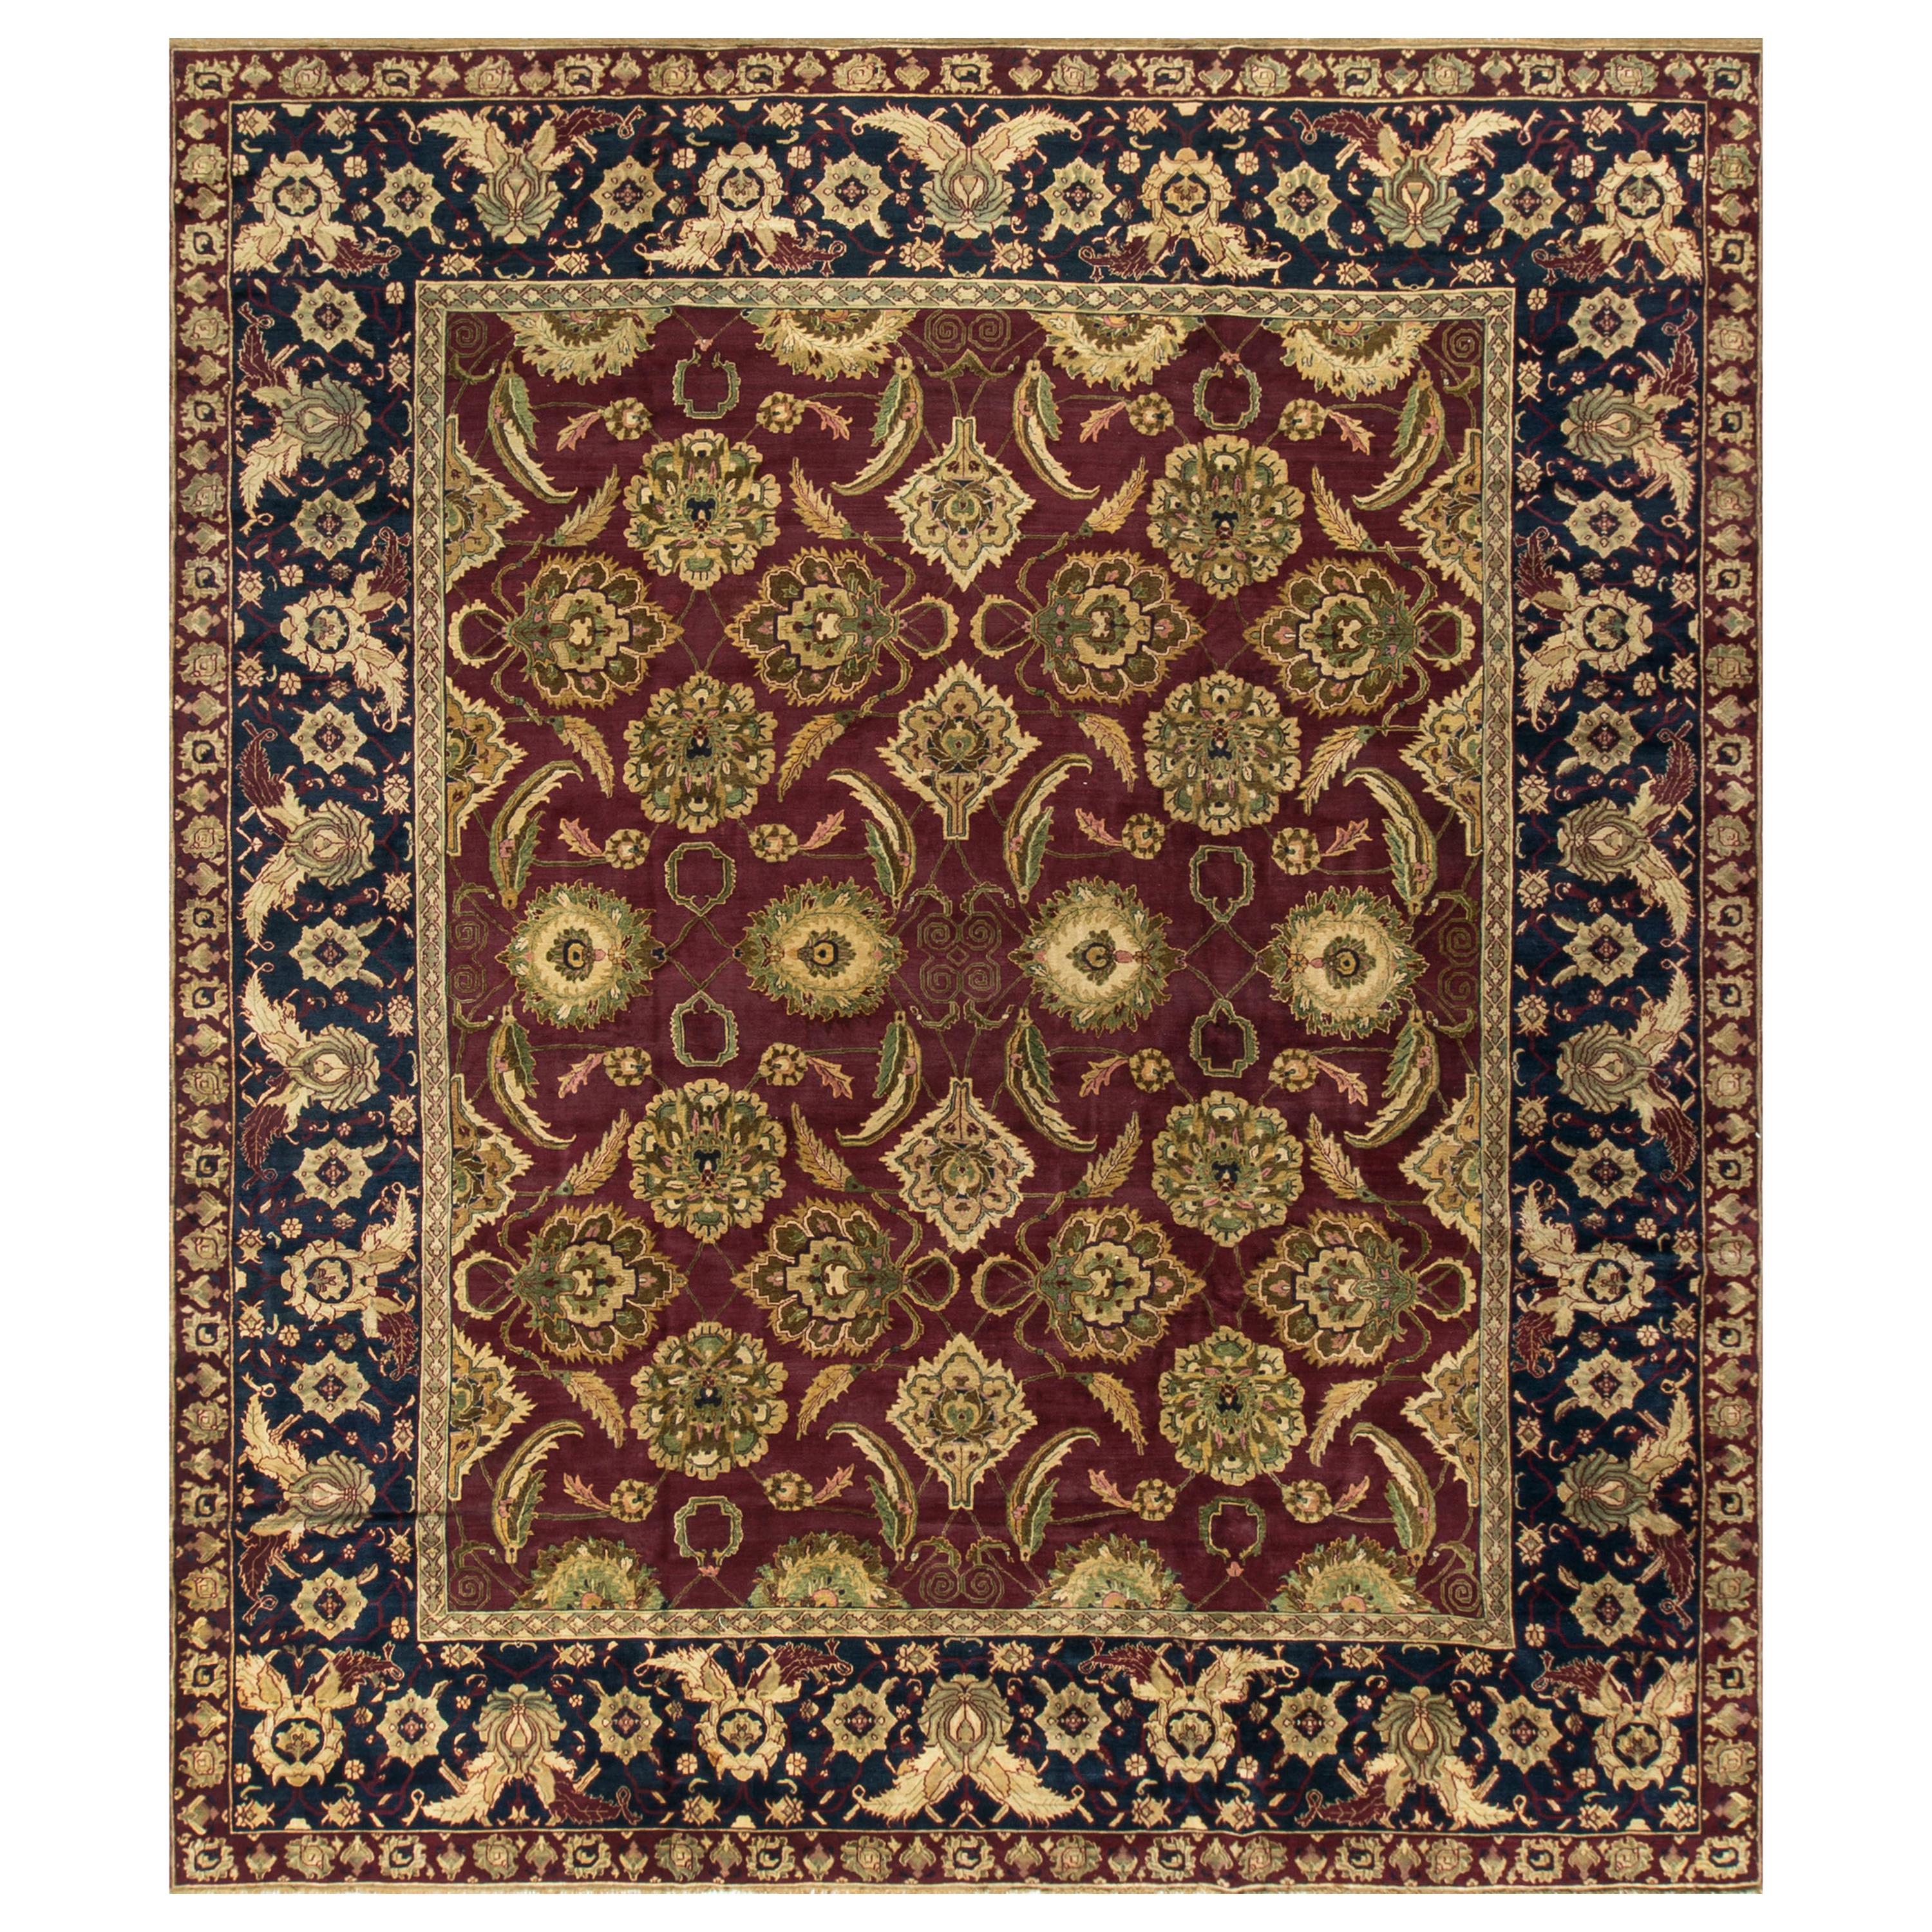 Antique Indian Agra Red / Navy Rug, circa 1890, Size 11'8 x 13'7